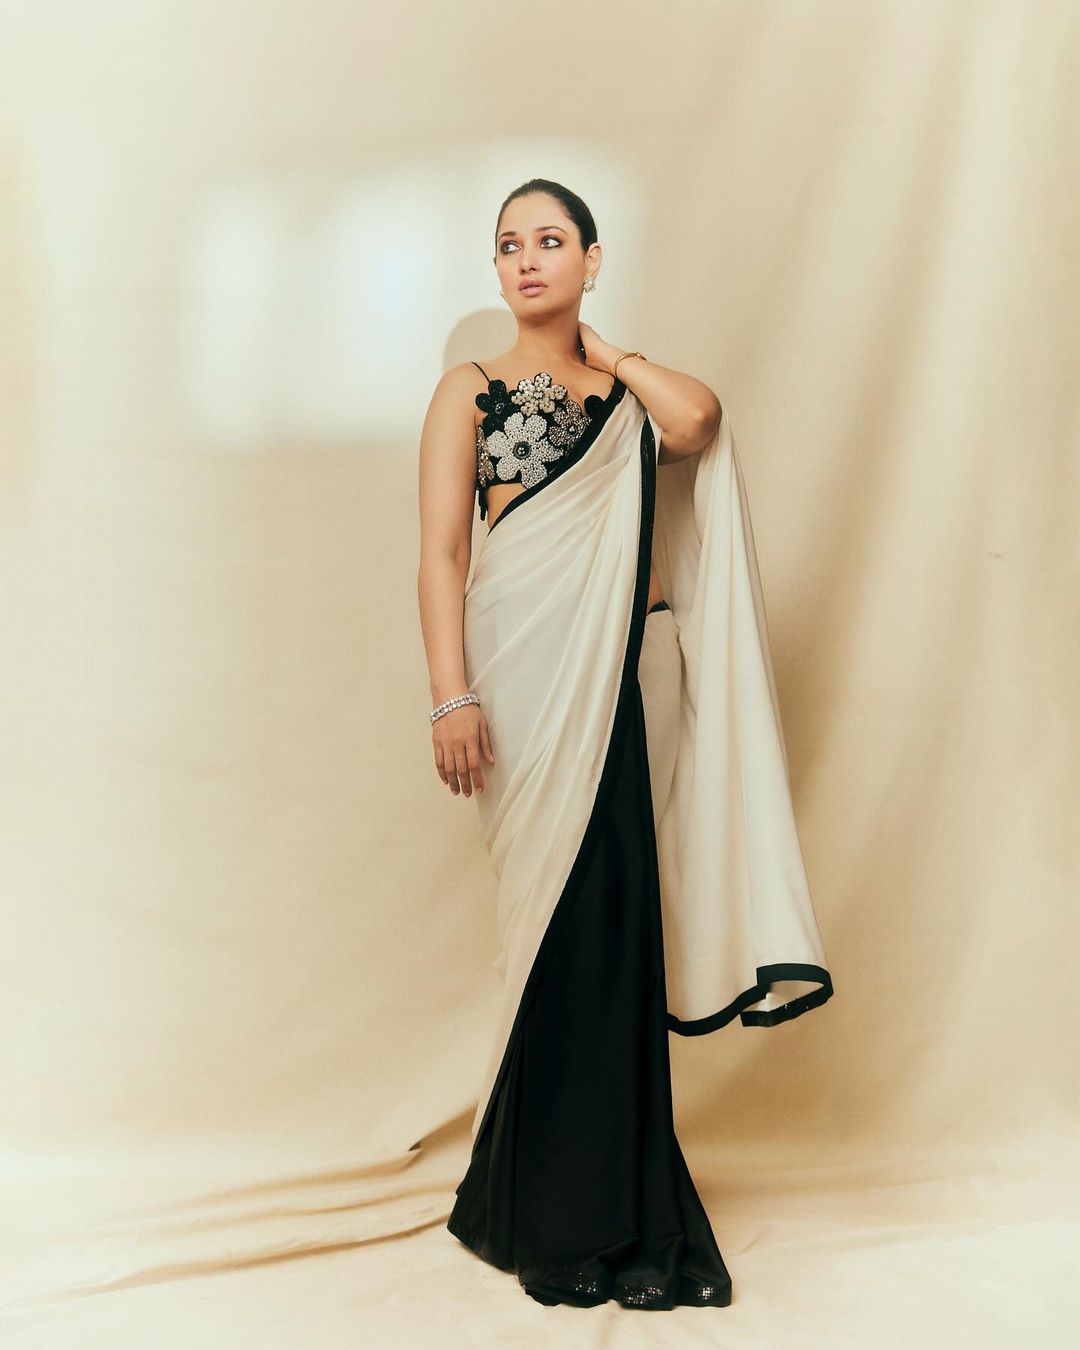 Milky Beauty Tamannaah Bhatia flaunts in a Floral Backless Blouse paired with a Black and White Saree